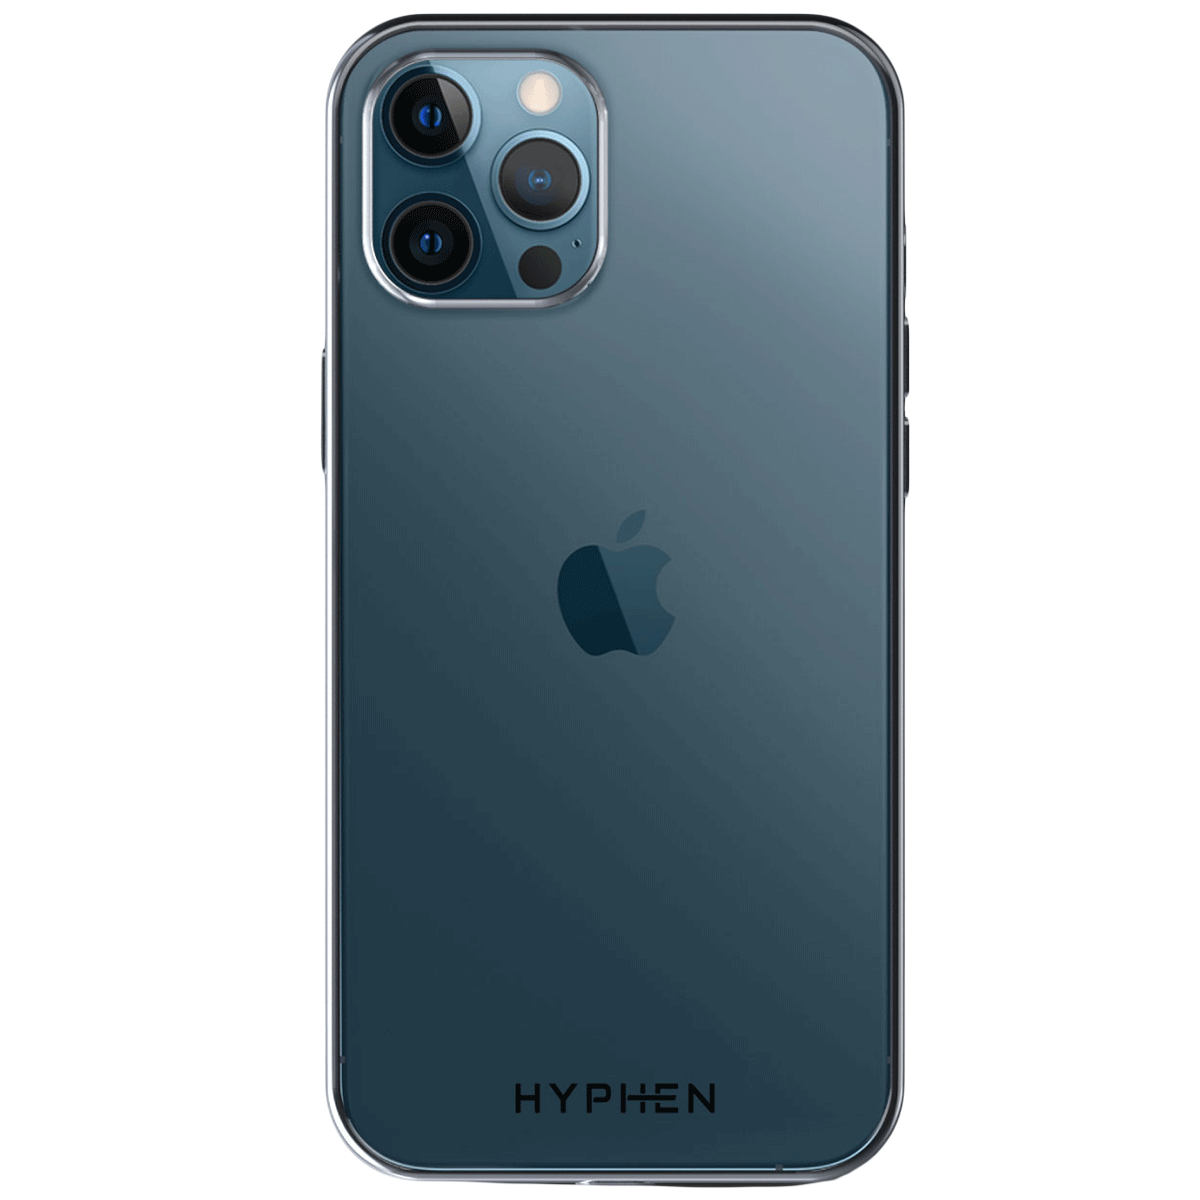 Hyphen Frame TPU Back Case For iPhone 12 Pro Max (Compact, Flexible and Slim Design, HPC-FXII679002, Silver)_3